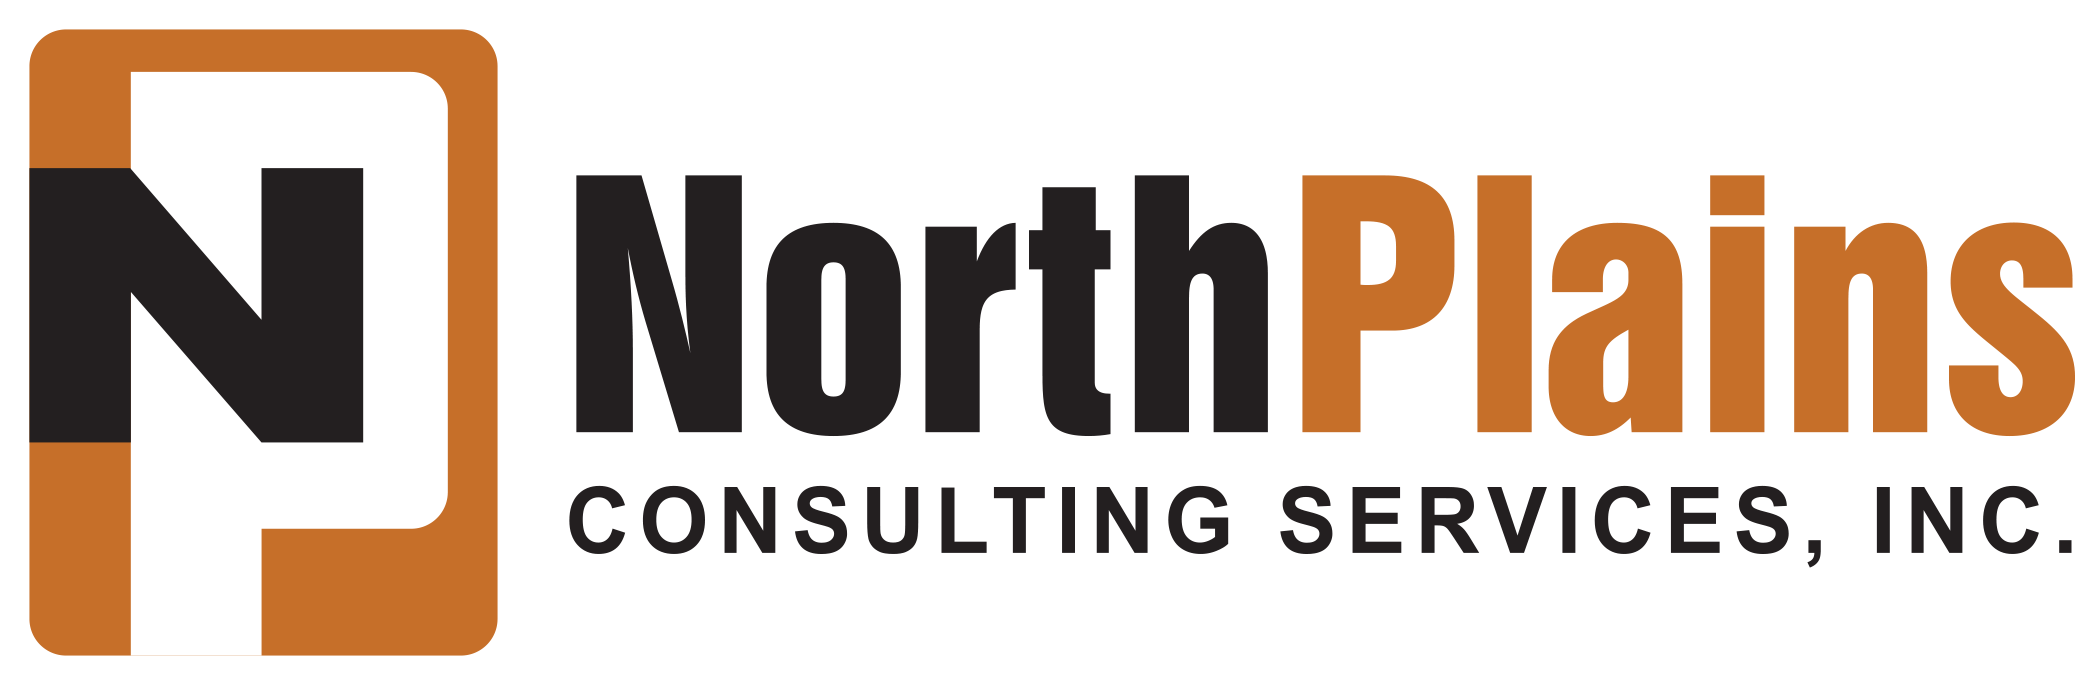 North Plains Consulting Services